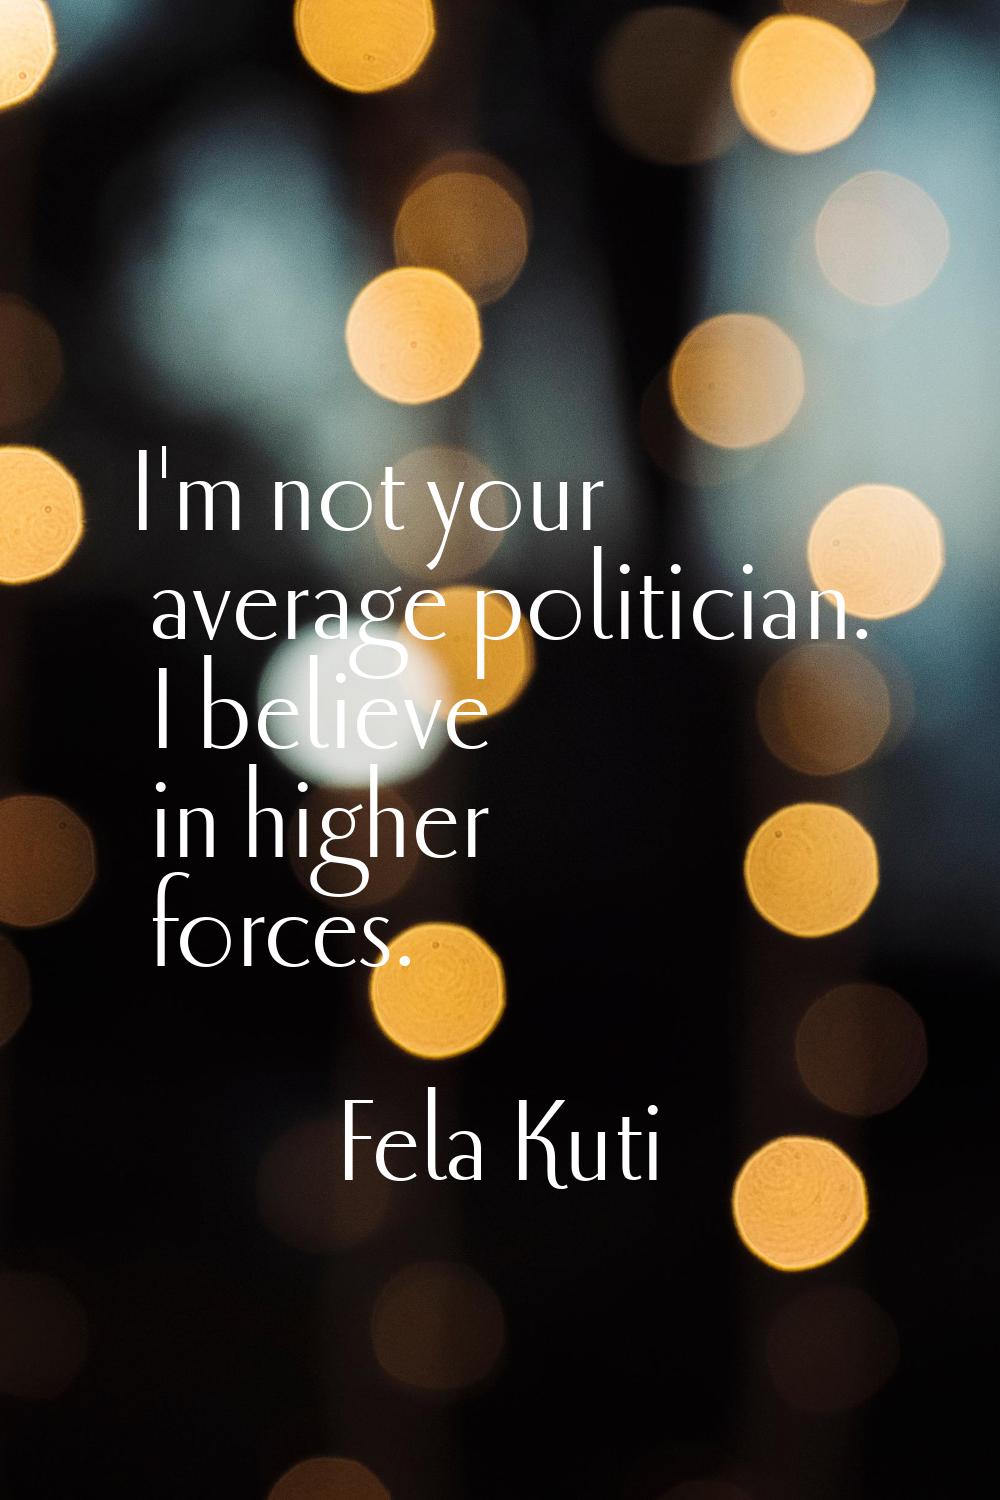 I'm not your average politician. I believe in higher forces.